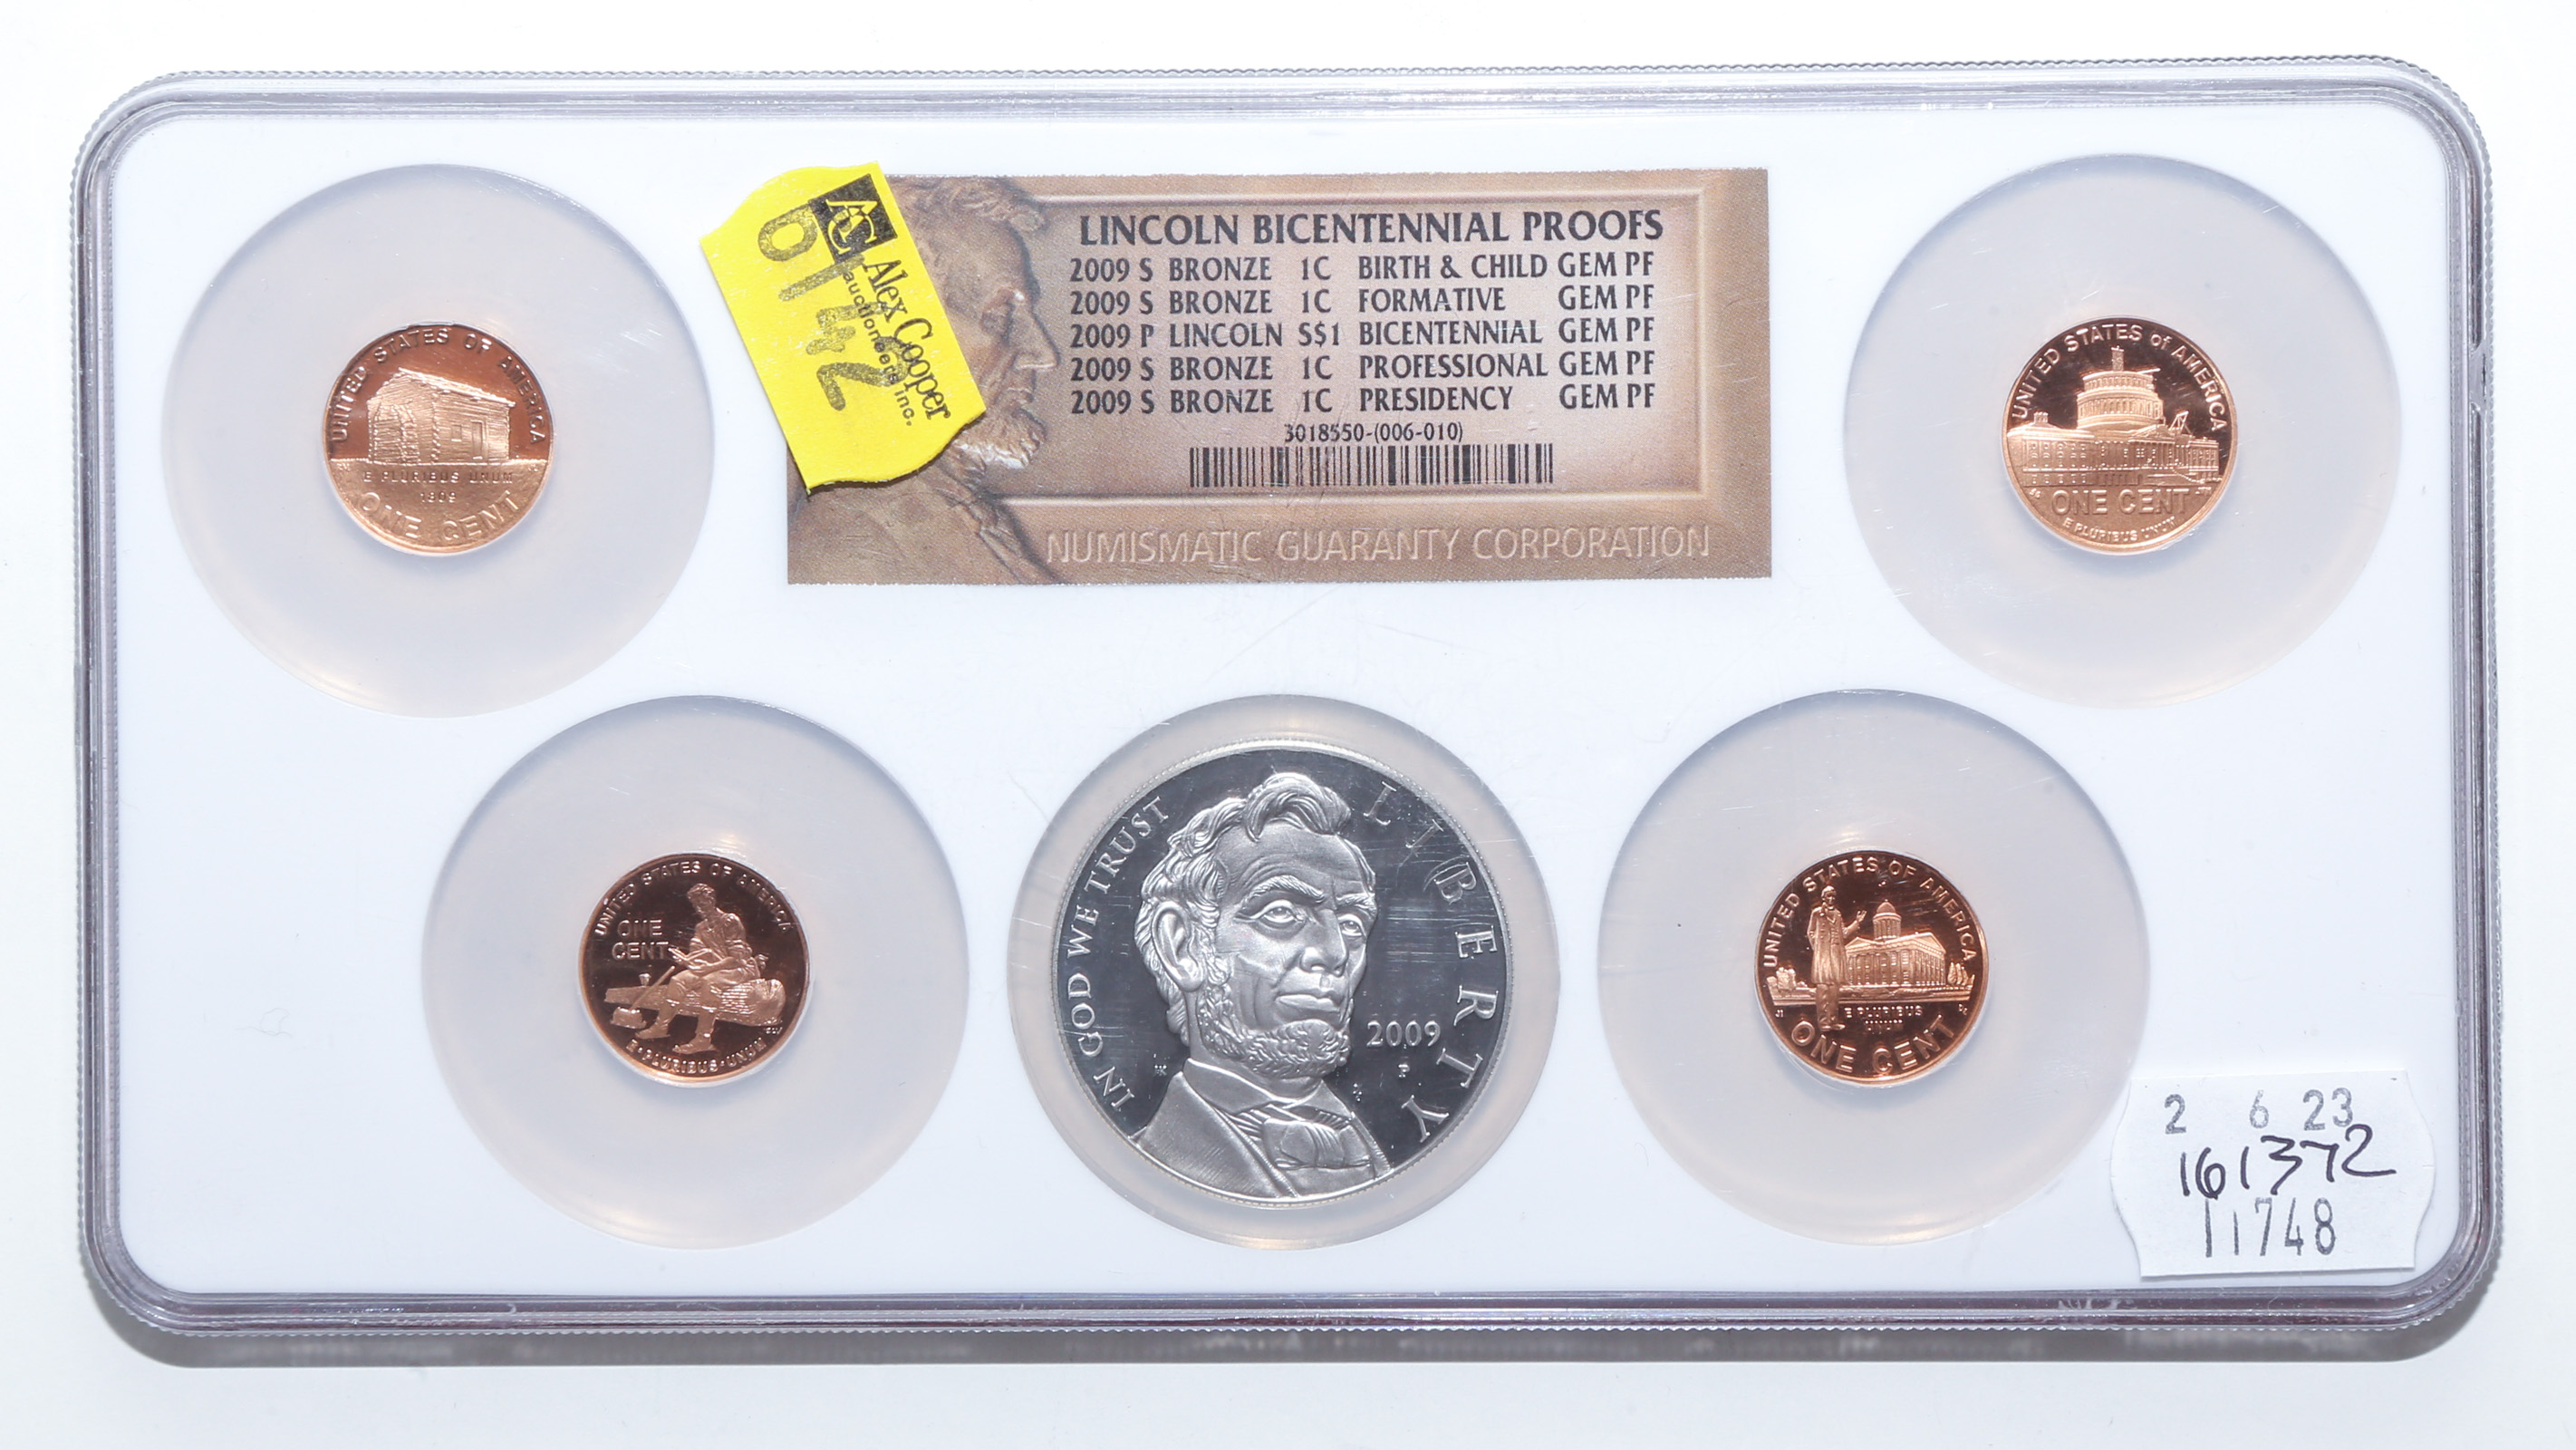 2009 LARGE NGC SLAB WITH LINCOLN